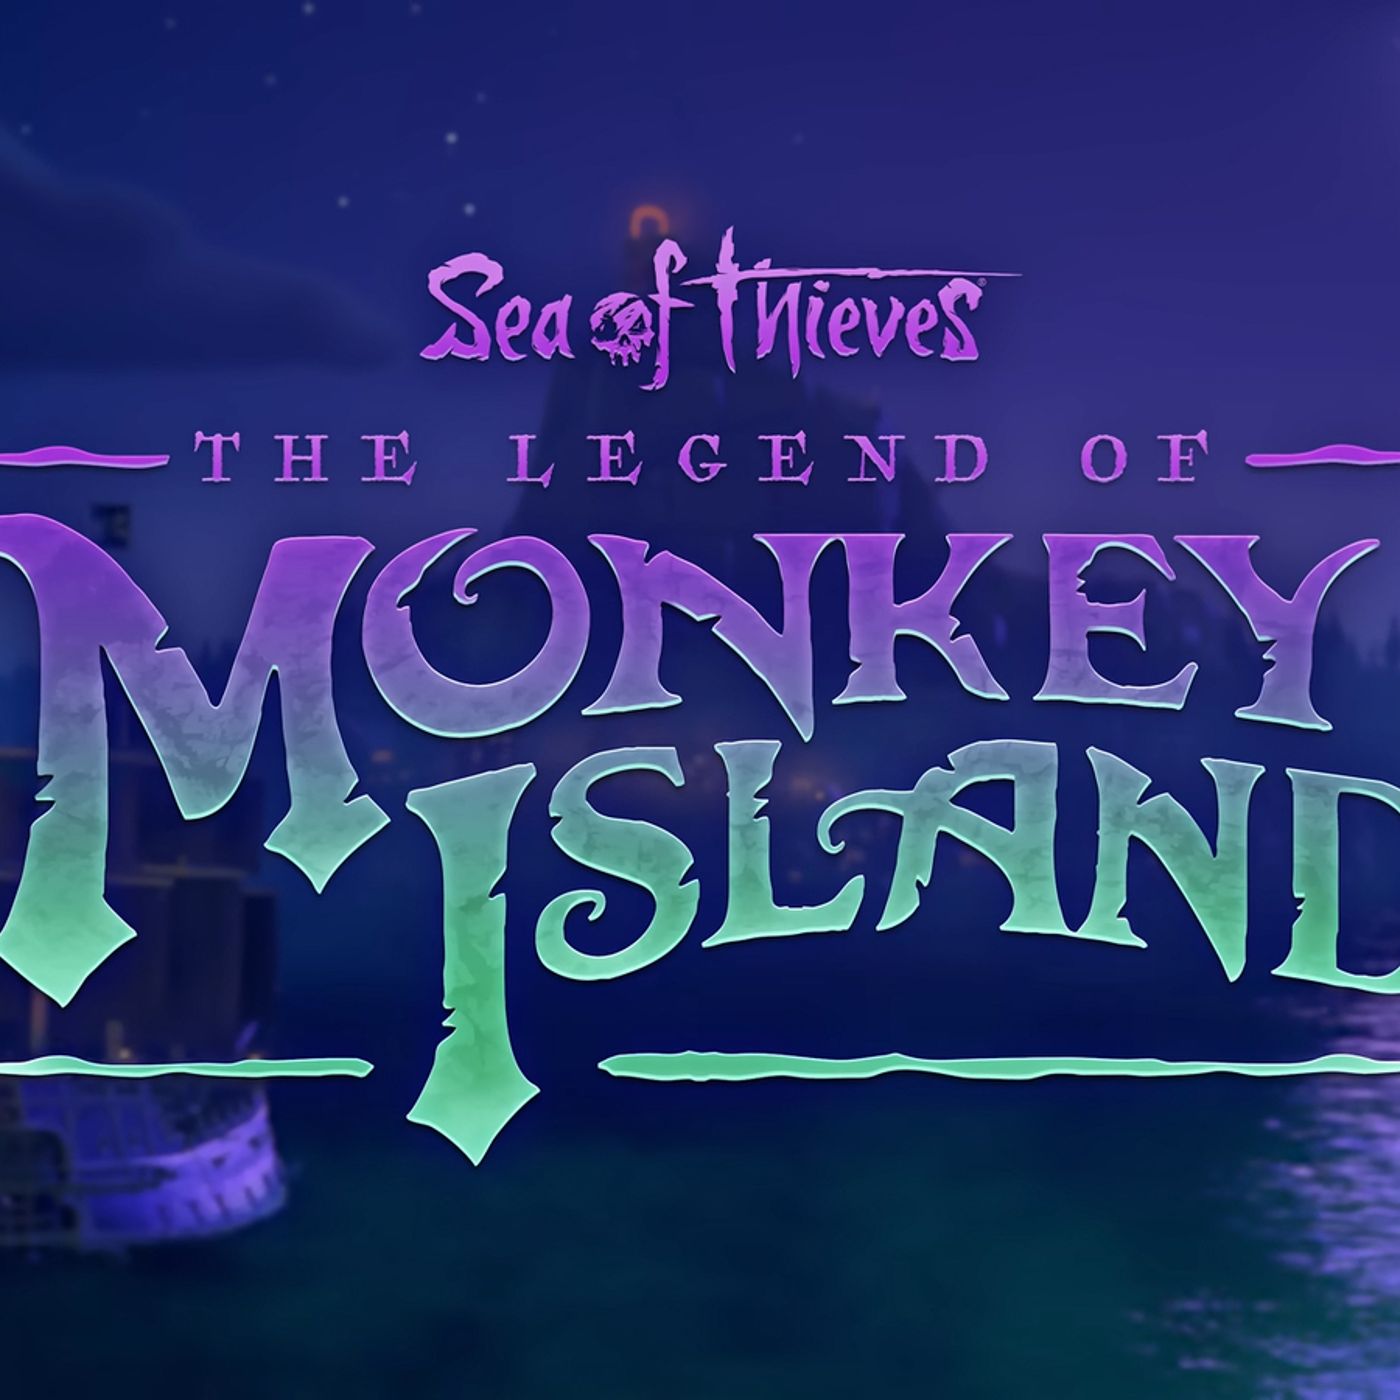 S18 Ep1291: Sea Of Thieves: The Legend of Monkey Island Review